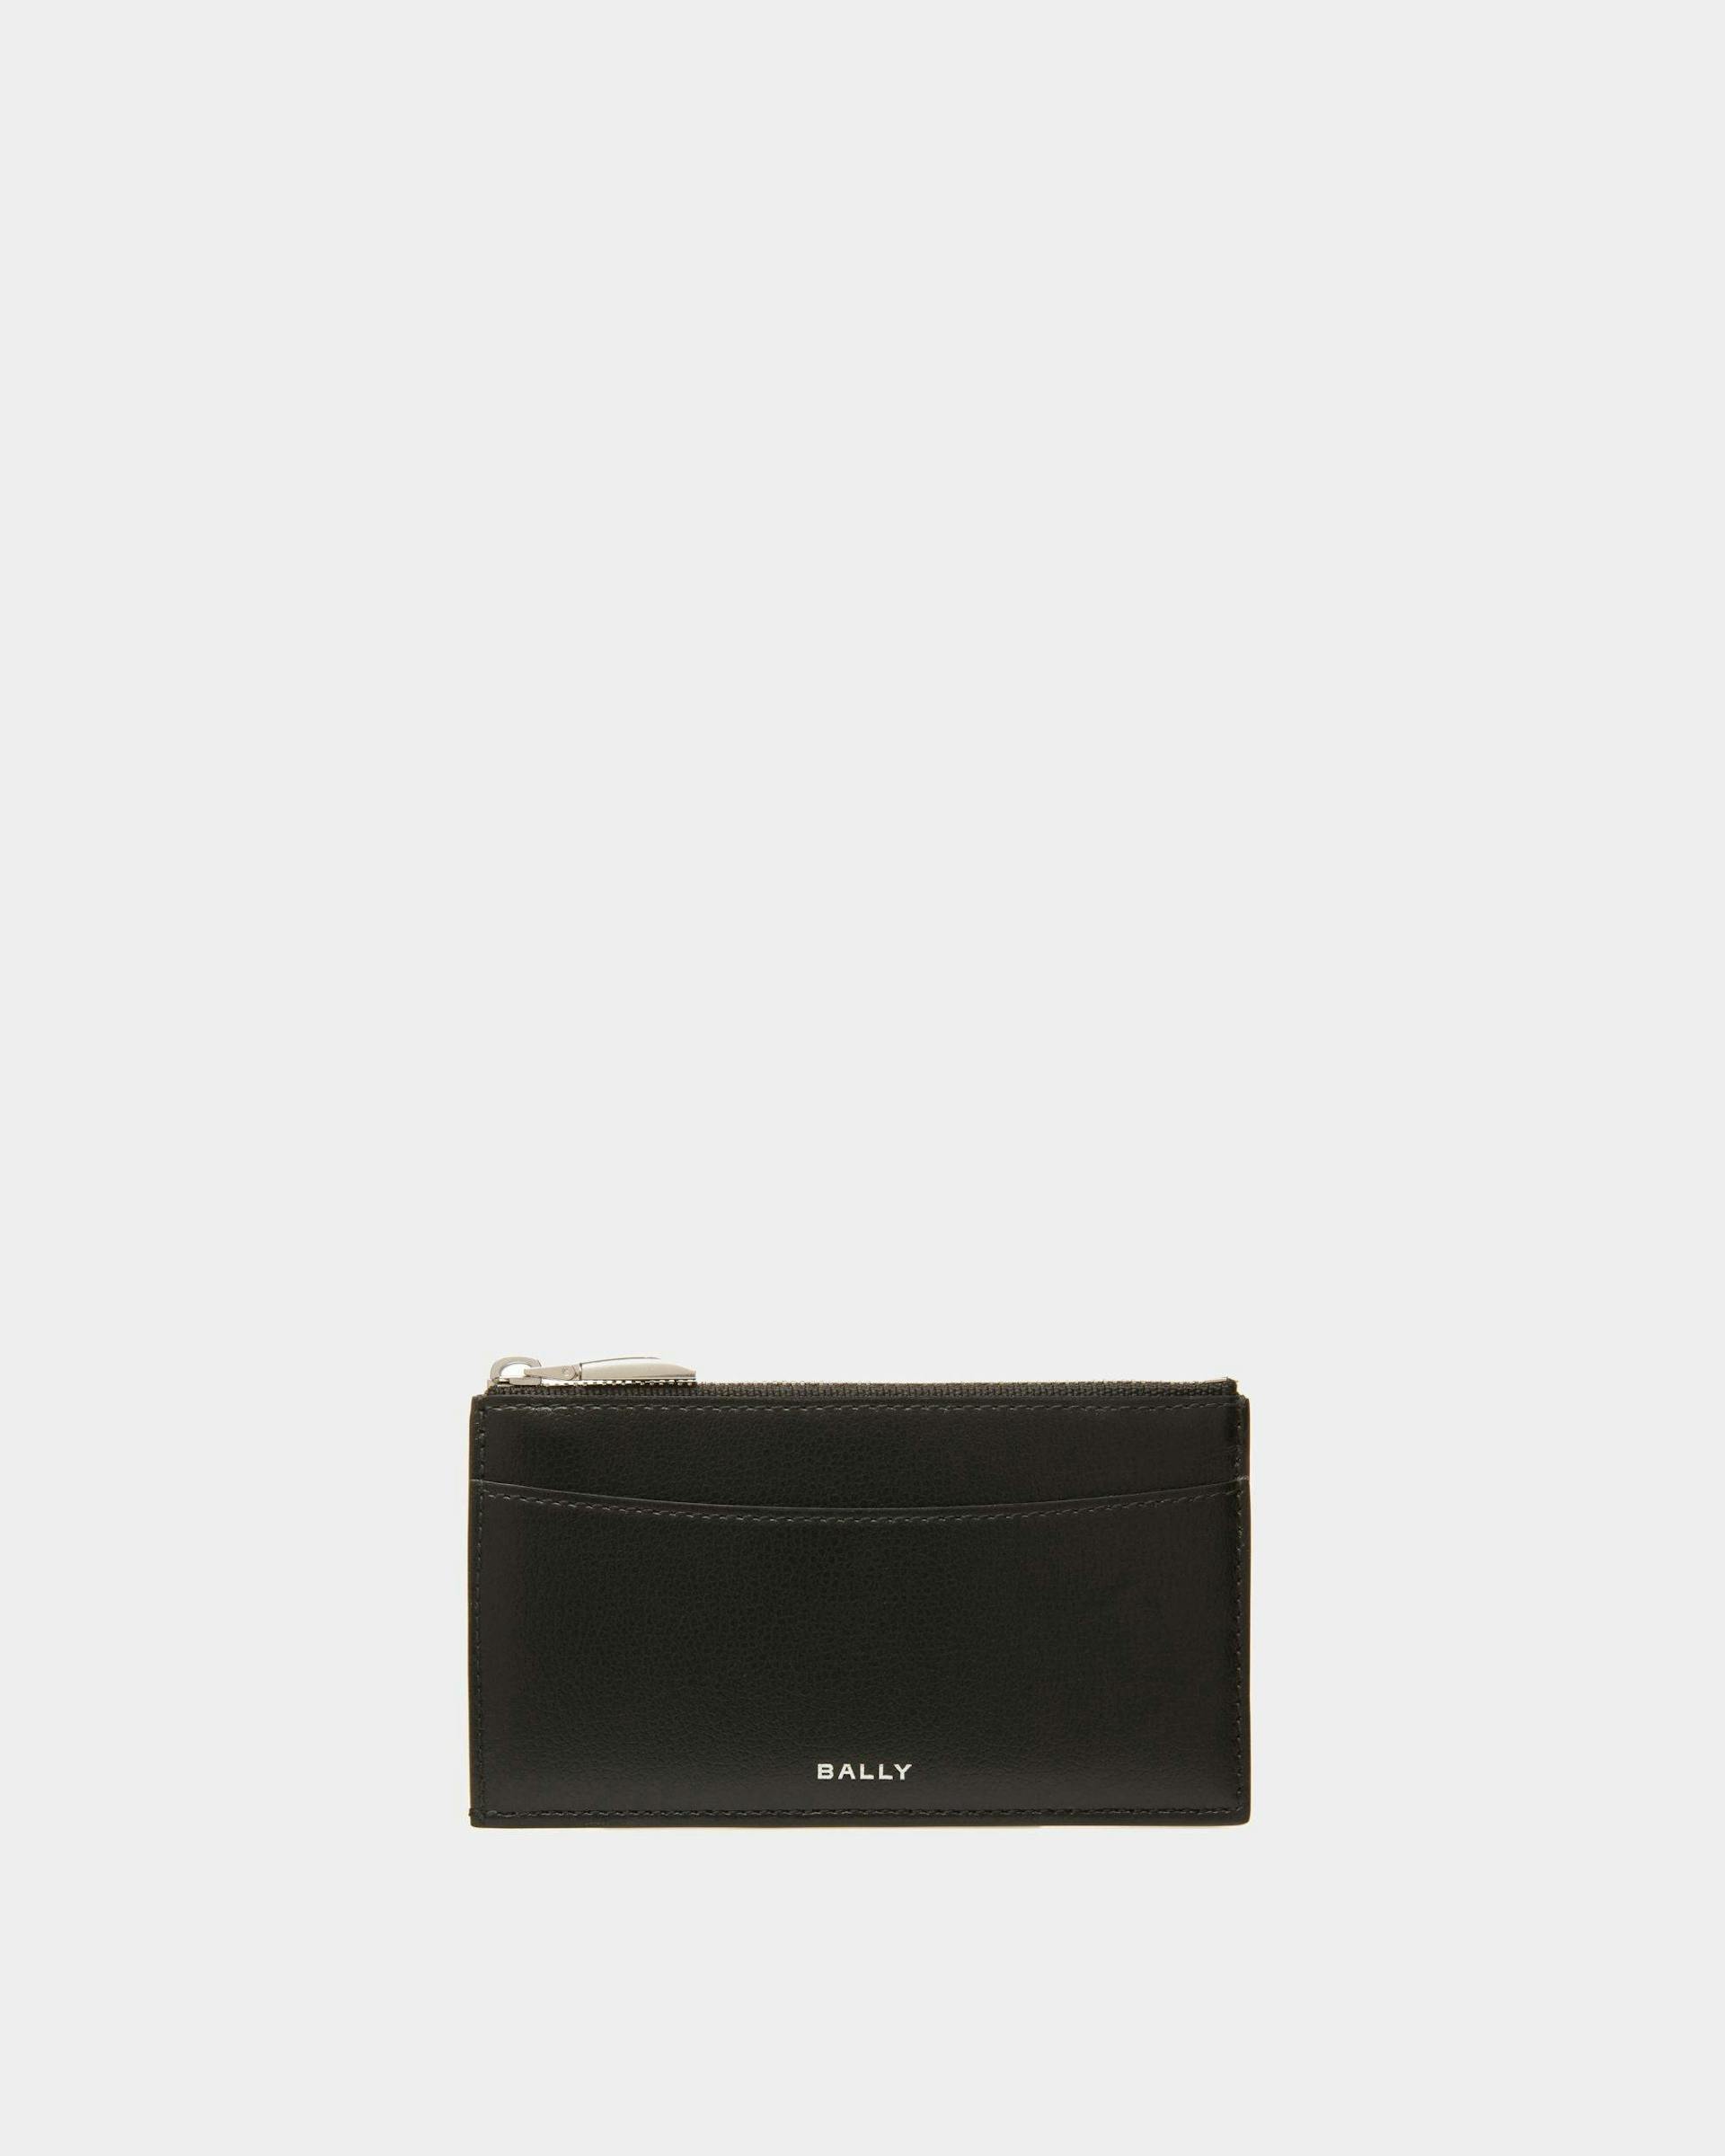 Men's Banque Business Card Holder In Black Leather | Bally | Still Life Front